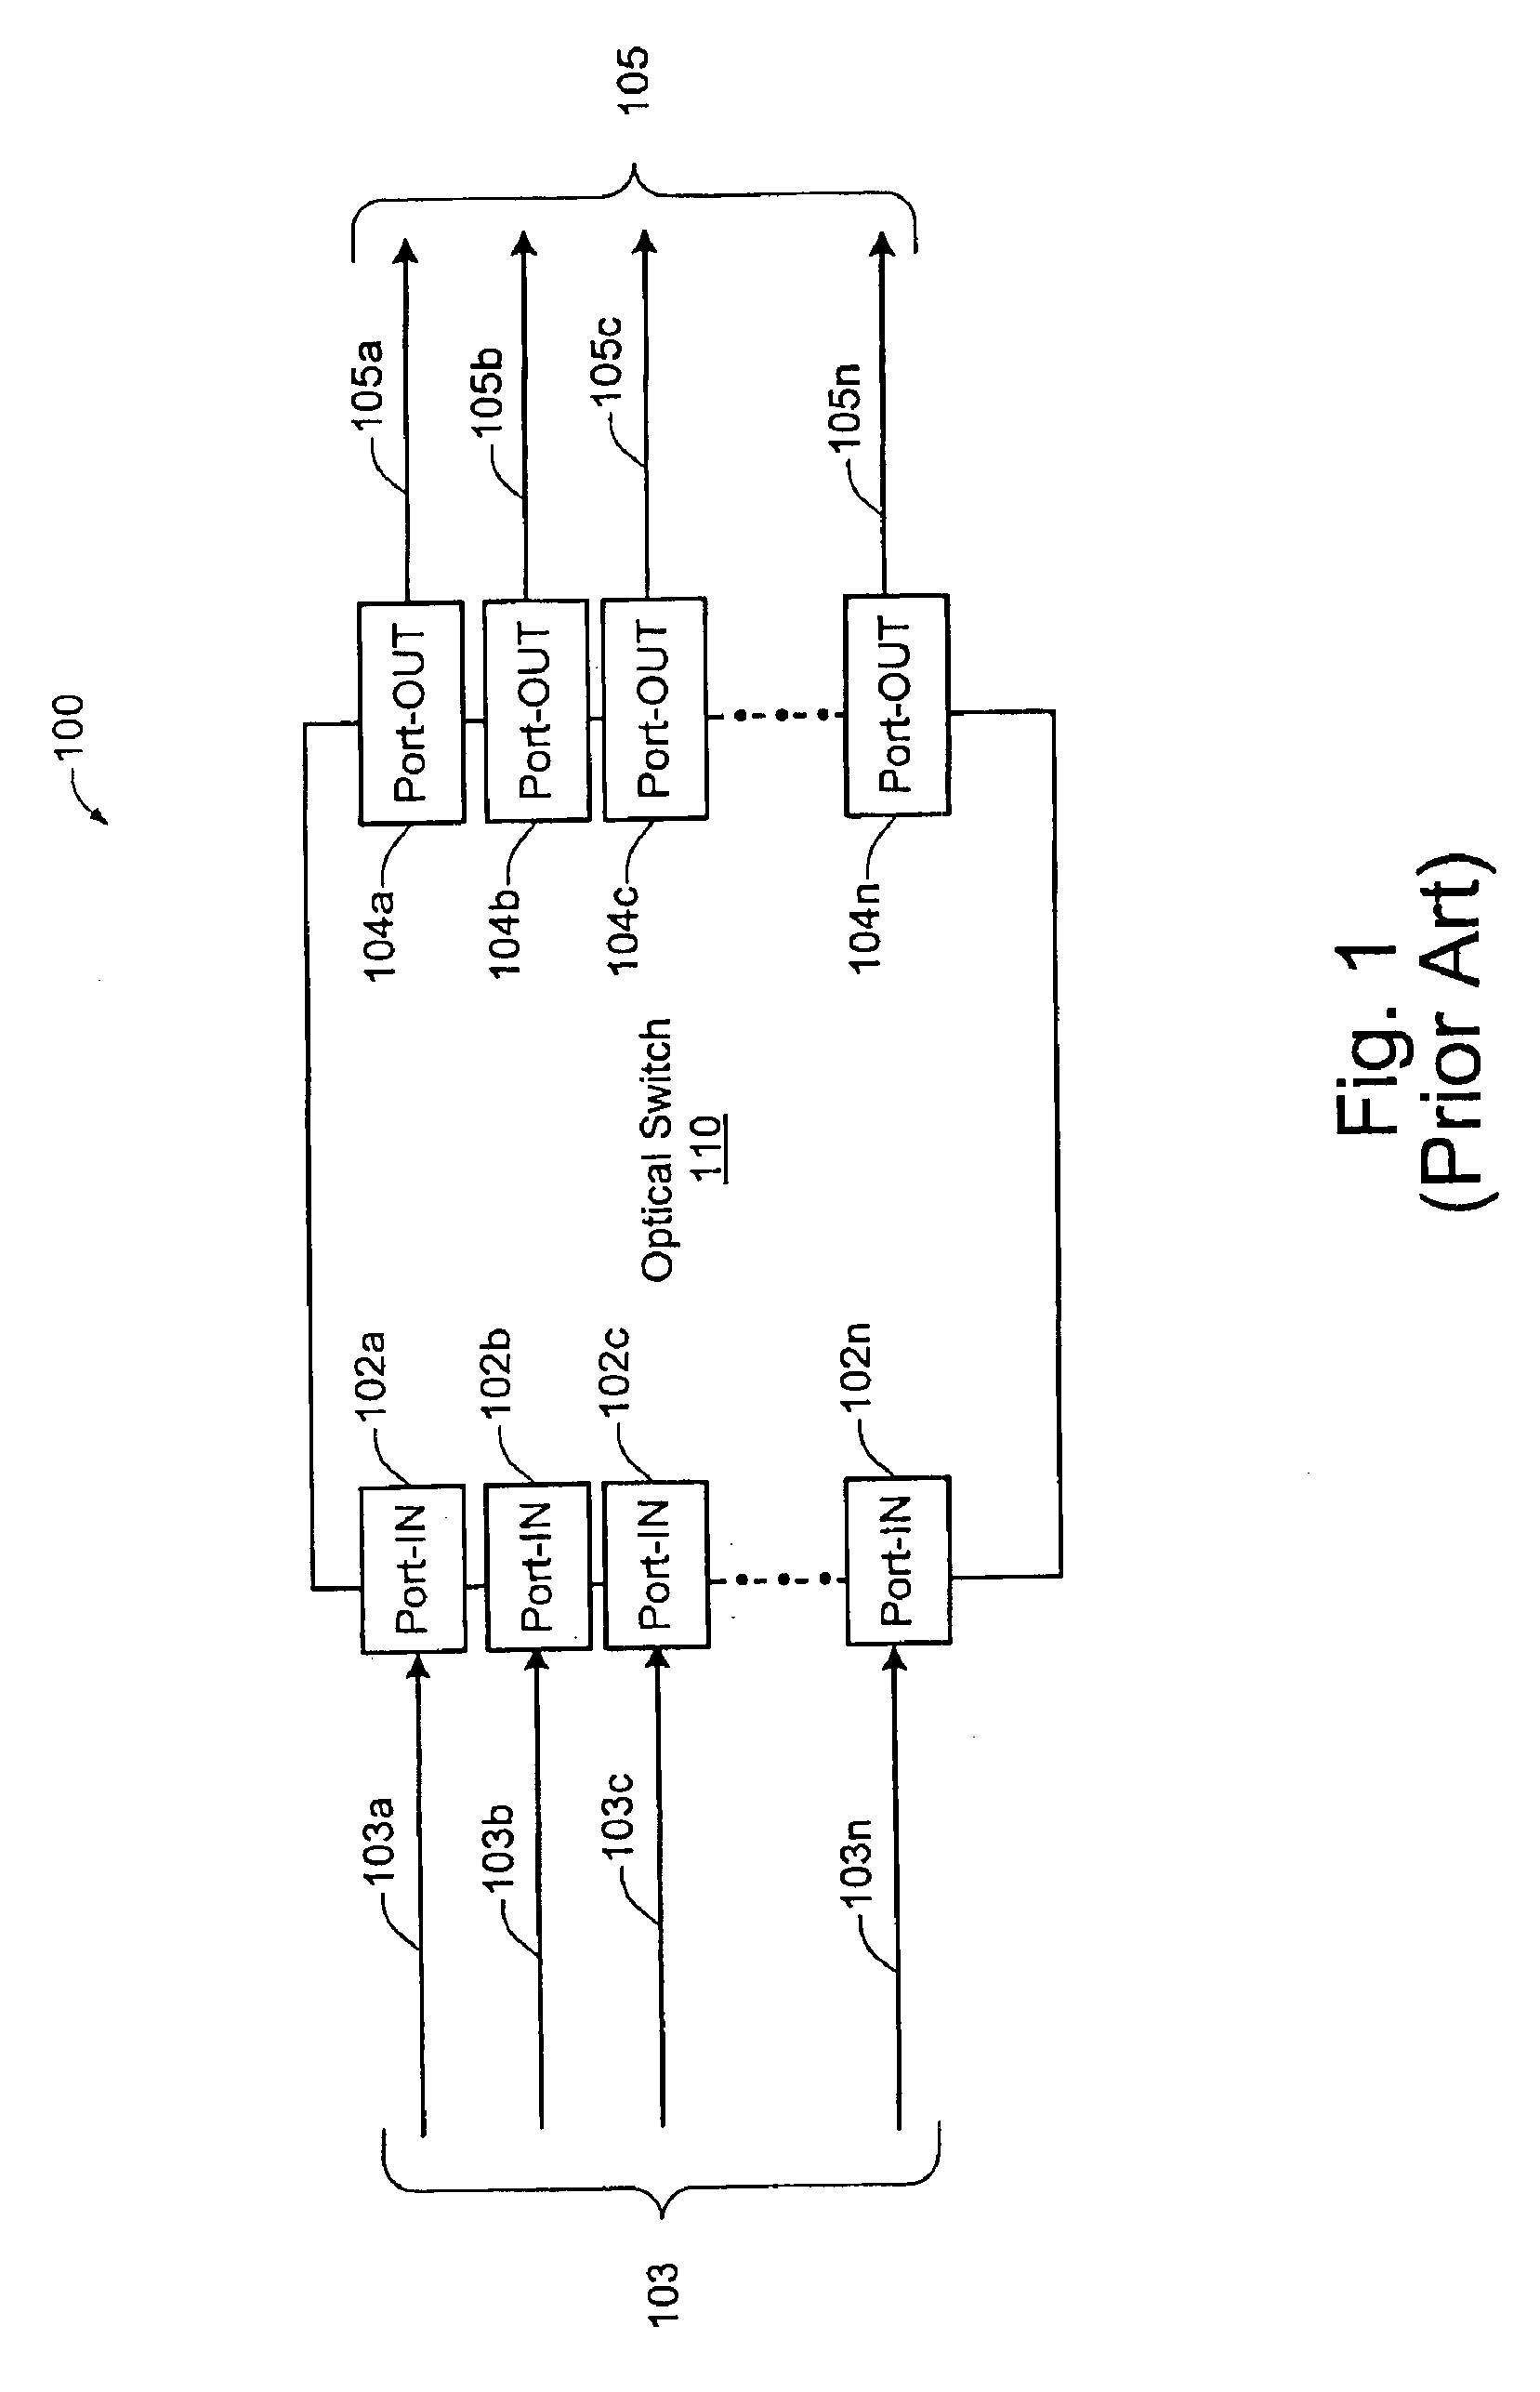 Multipurpose testing system for optical cross connect devices